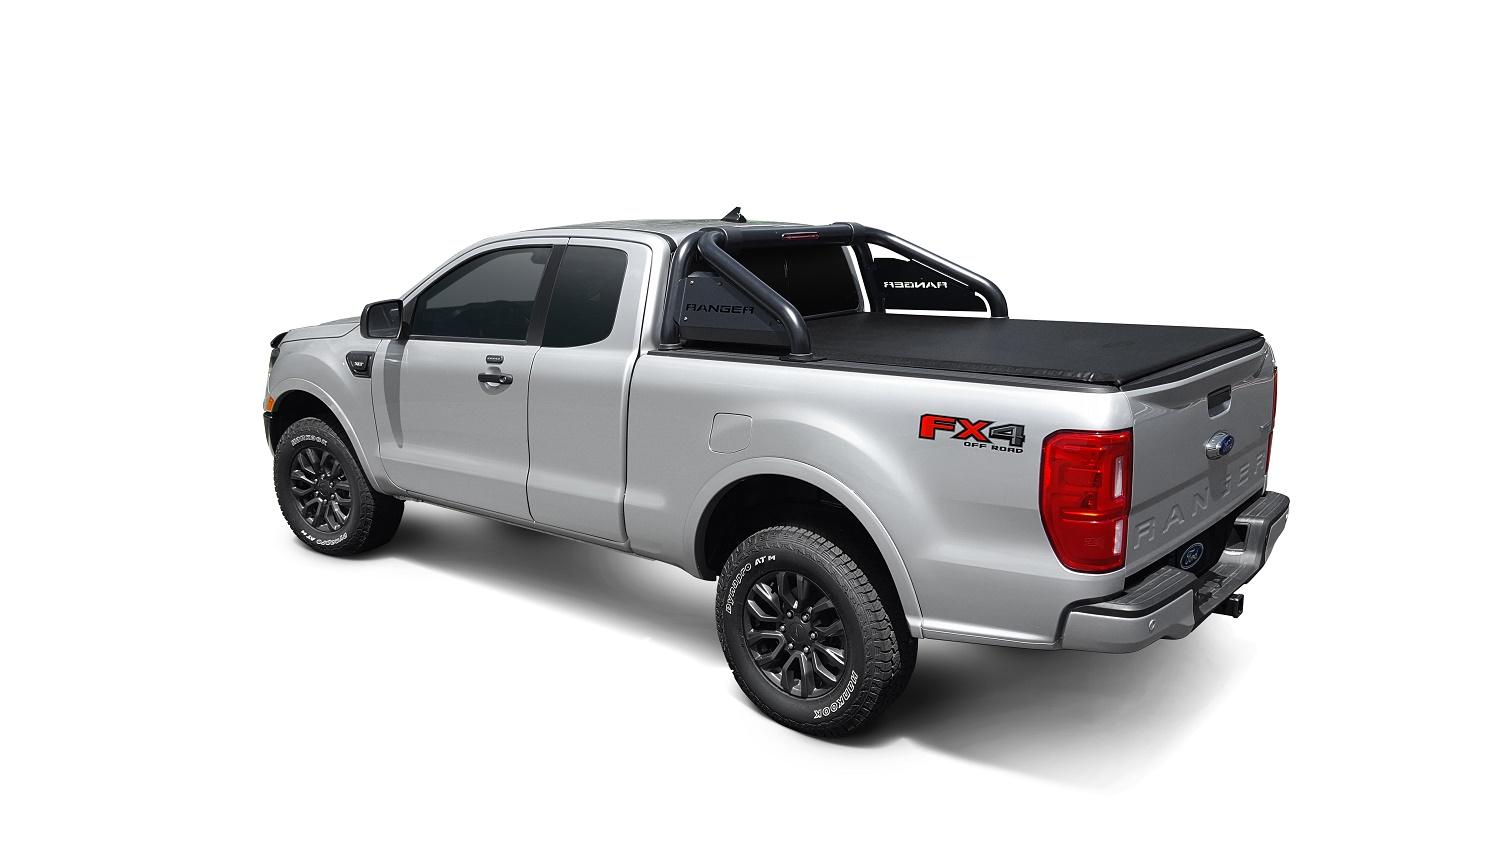 Image for Tonneau/Bed Cover - XLP Premium Soft Roll-Up by TruXedo, For 6.0 Bed With Sport Bar from AccessoriesCanada